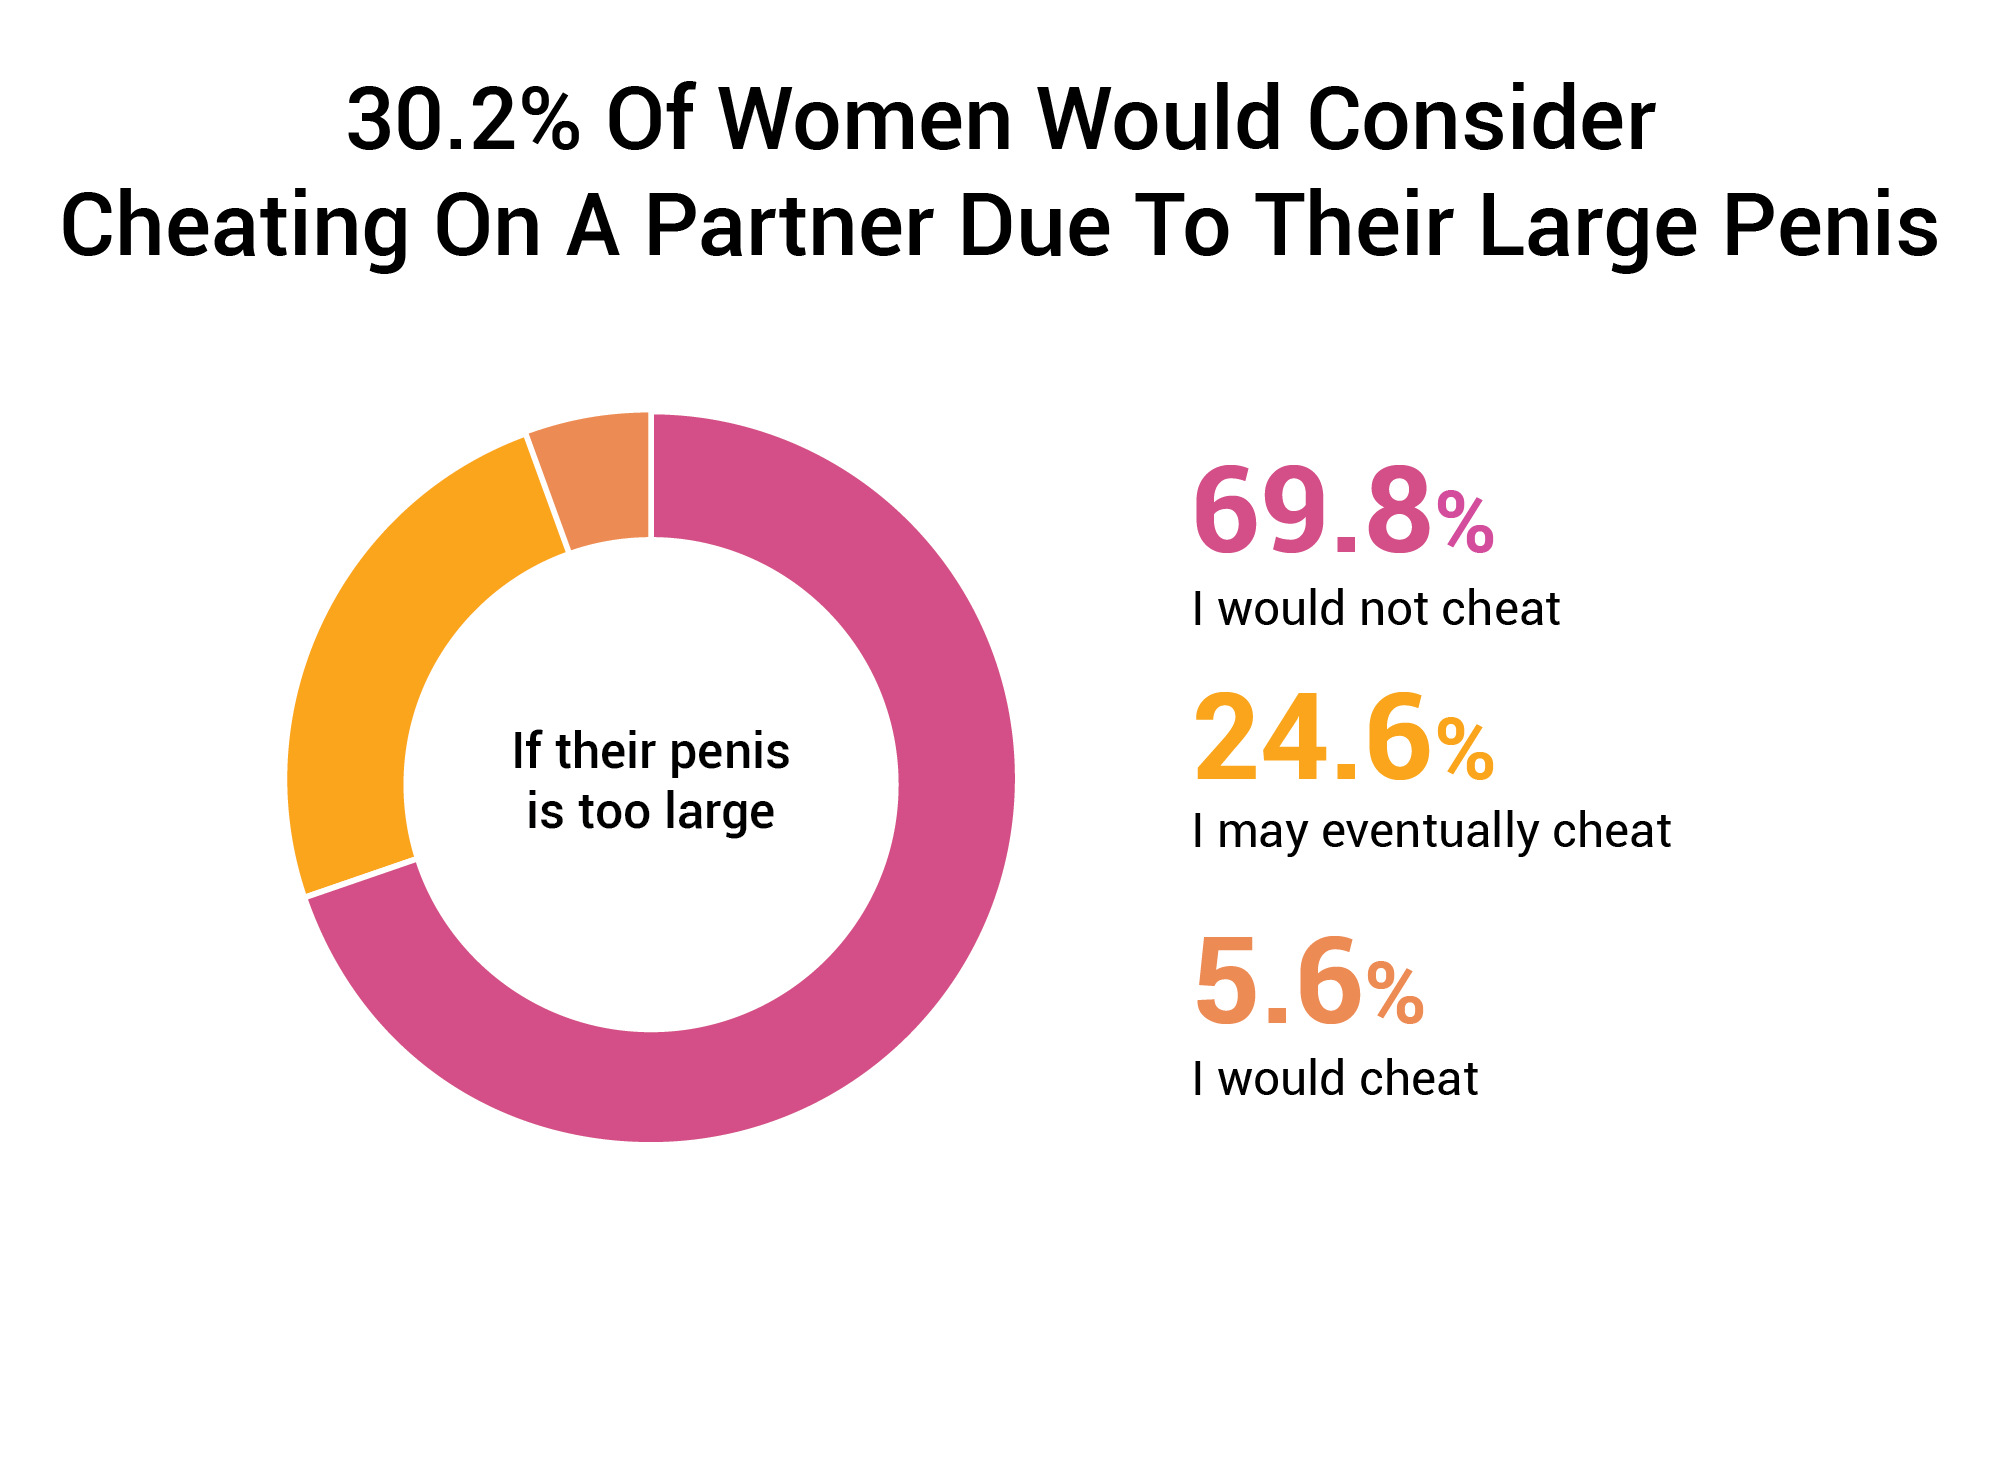 30.2-Of-Women-Would-Consider-Cheating-On-A-Partner-Due-To-Their-Large-Penis.png